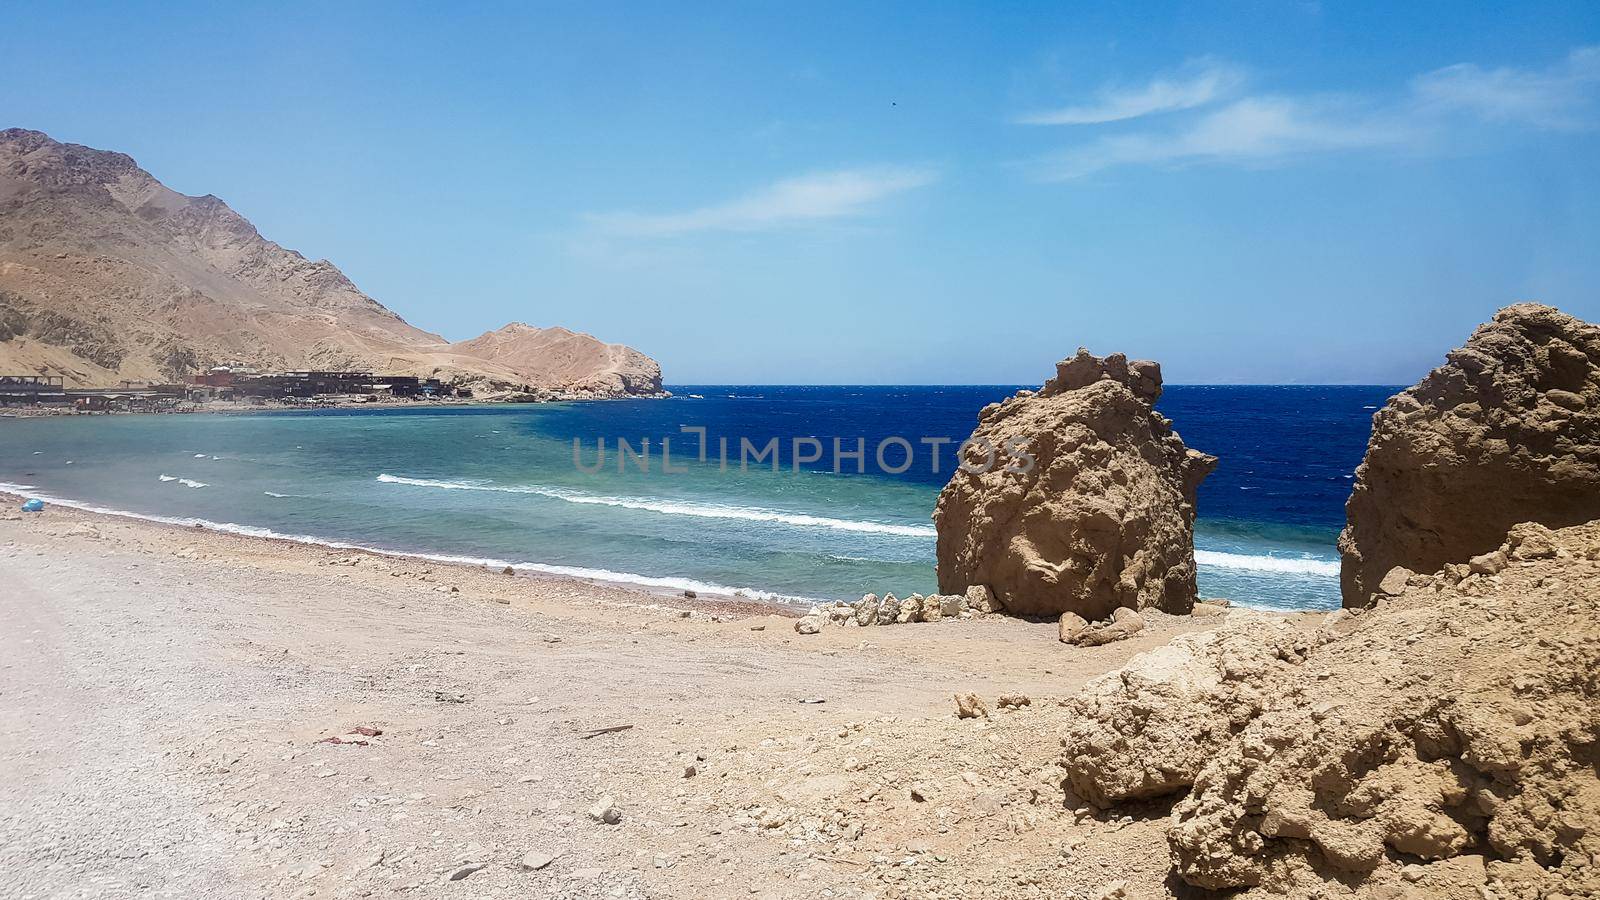 The Blue Hole is a popular diving spot in East Sinai. Sunny beach resort on the Red Sea in Dahab. A famous tourist destination near Sharm el Sheikh. Bright sunshine by Roshchyn